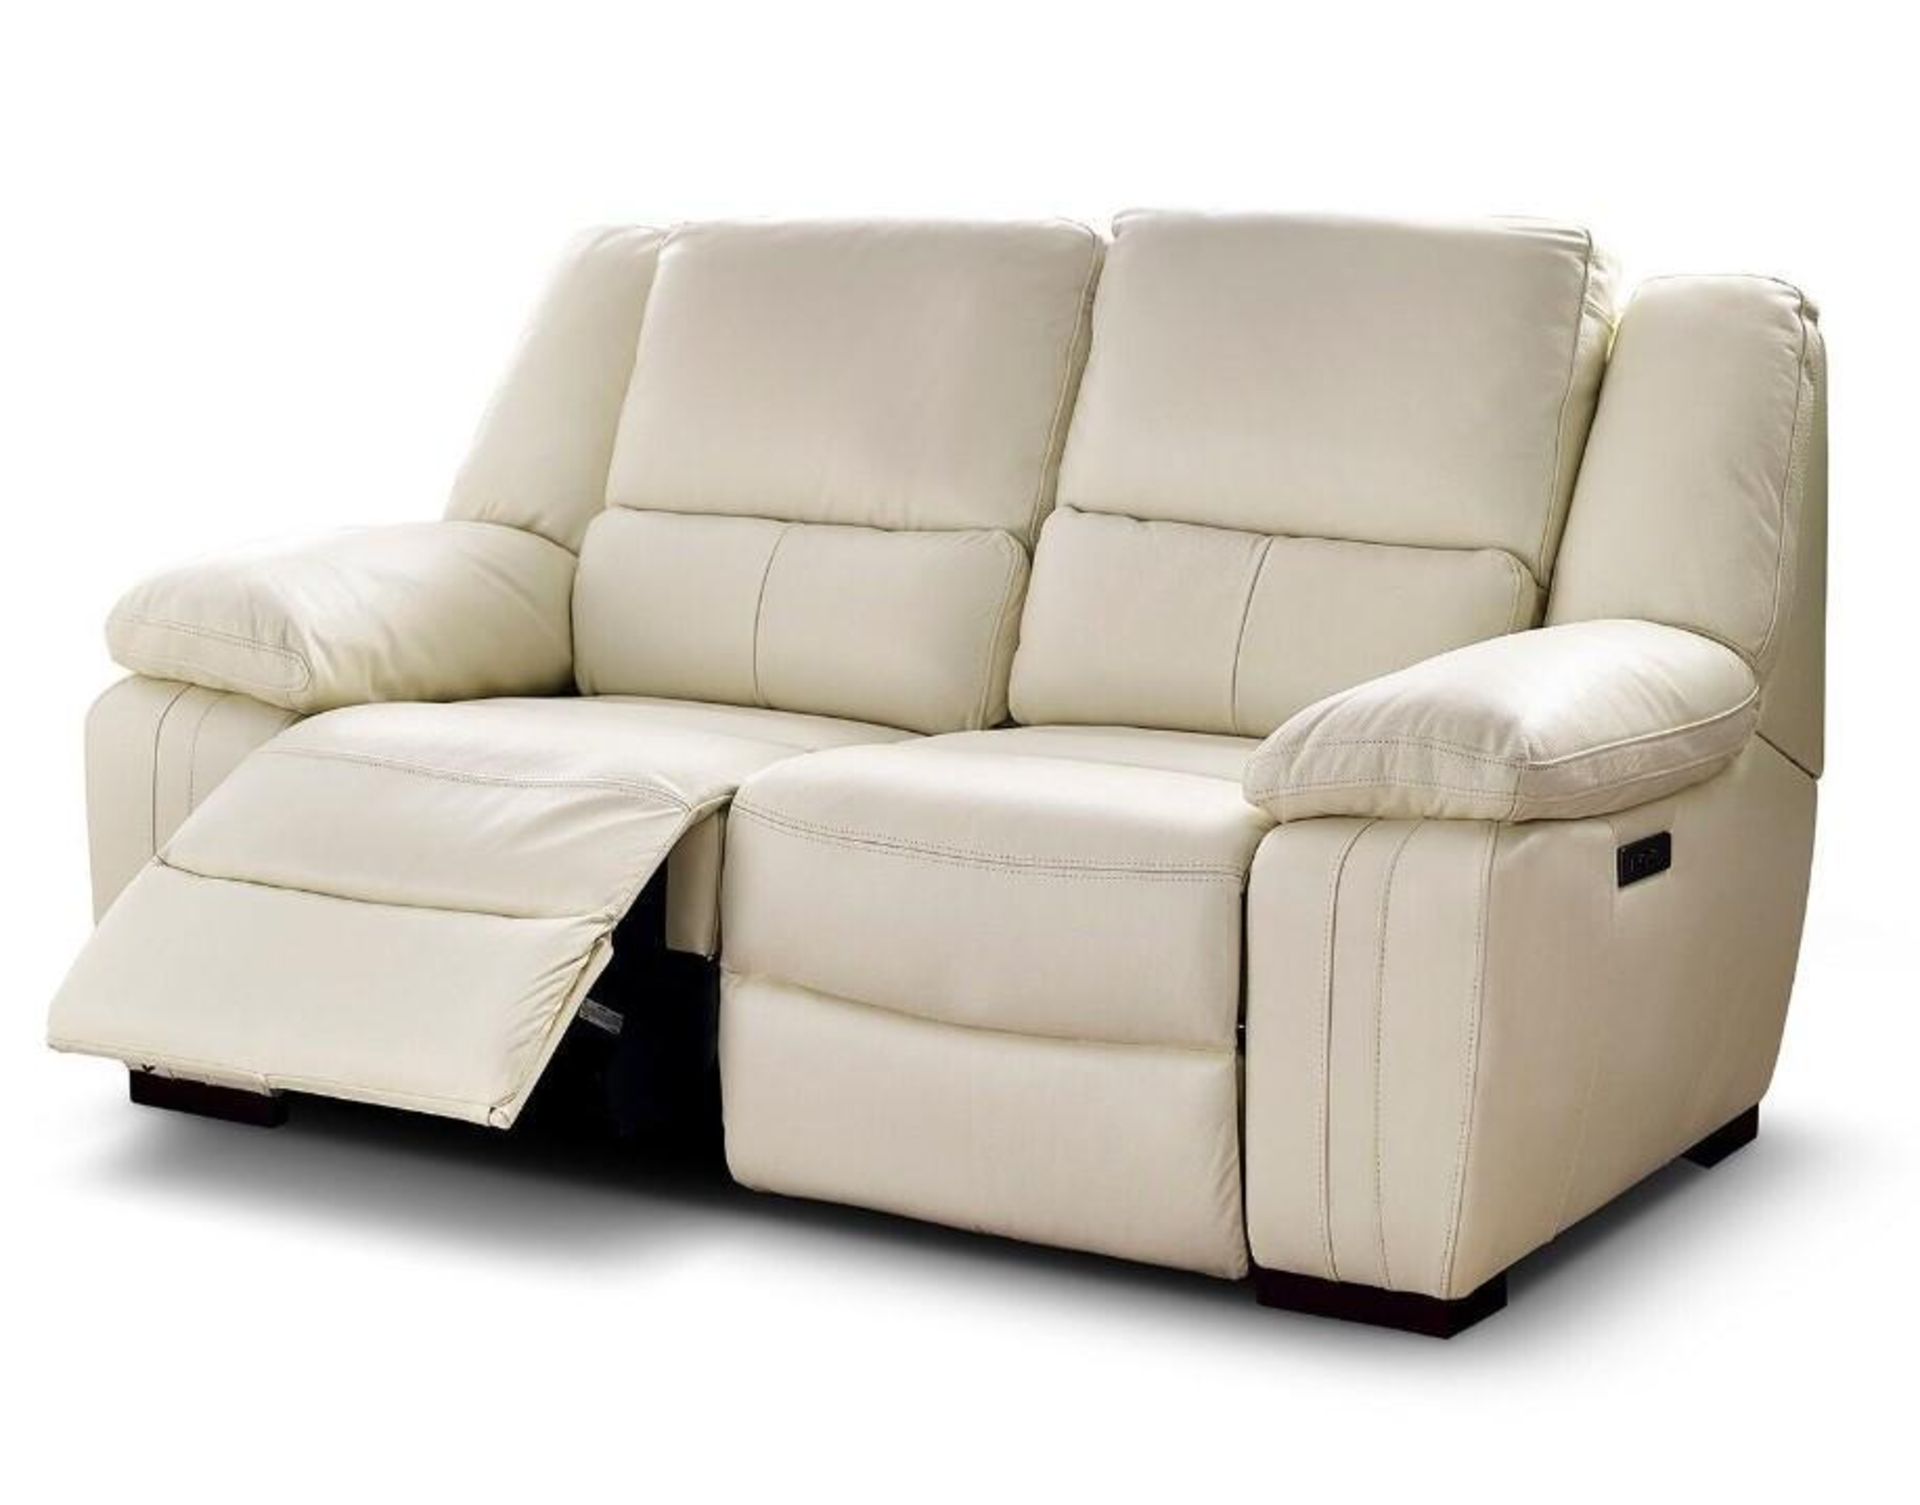 Brand new and boxed SCS Fallon 3 seater electric reclining sofa in Cream. - Image 2 of 7